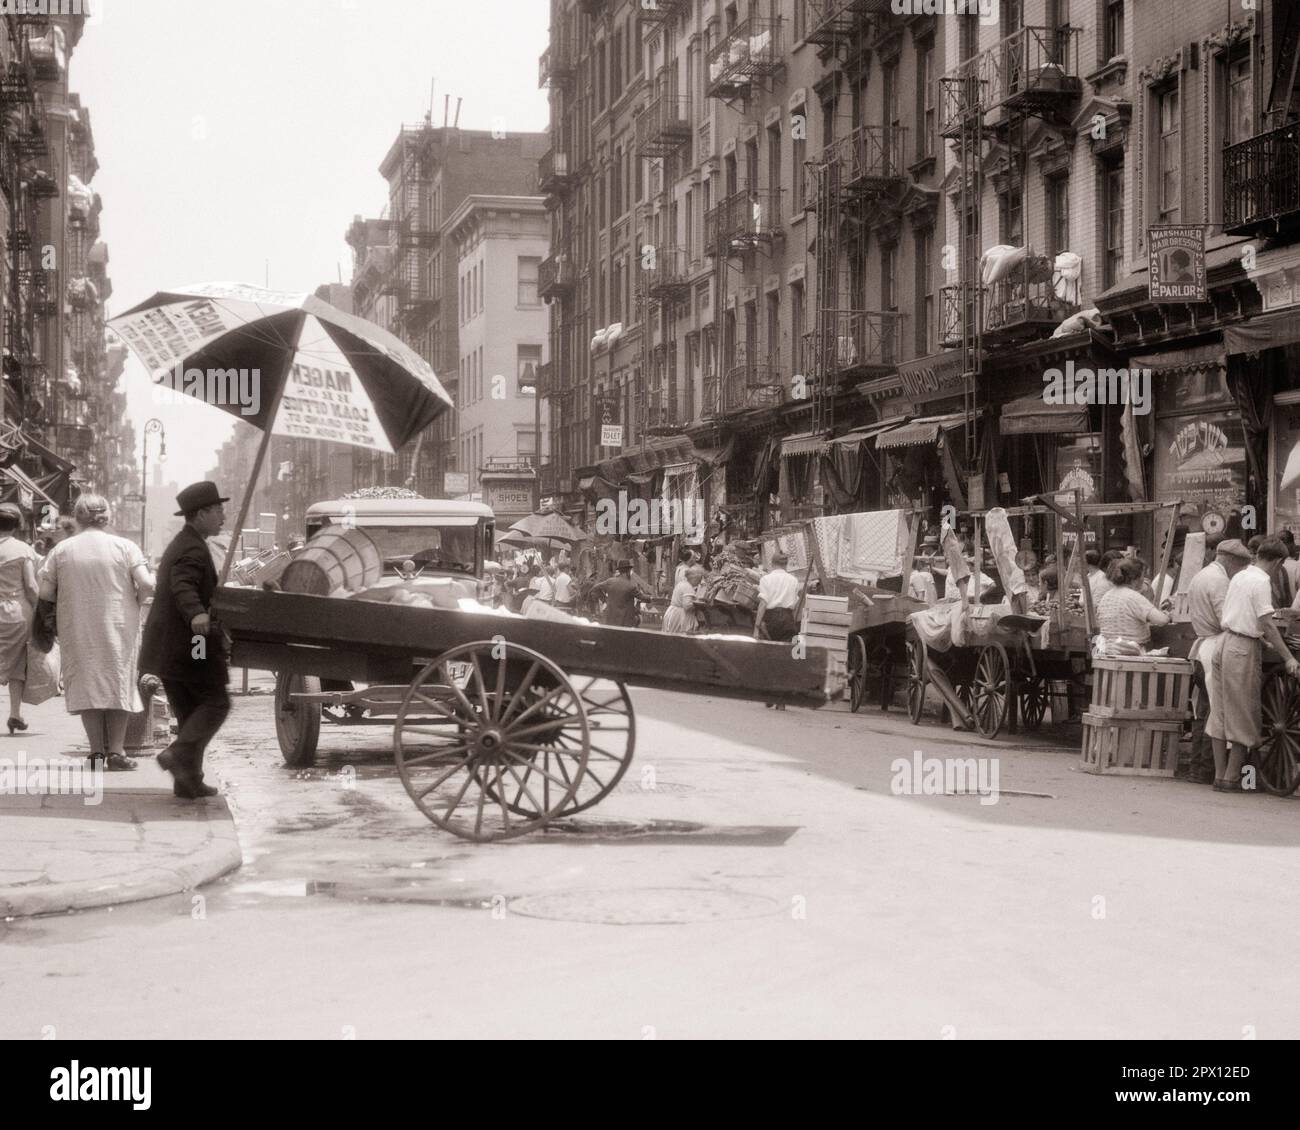 1930s PUSH CART VENDORS SELLING EVERYTHING FOOD FRUITS AND VEGETABLES CLOTHES FABRIC SHOES LOWER EAST SIDE NEW YORK CITY NY USA - m3464 HAR001 HARS PERSONS SCENIC SHOPS UNITED STATES OF AMERICA MALES BUILDINGS NY TRANSPORTATION B&W NORTH AMERICA SHOPPER NORTH AMERICAN IMMIGRANTS SHOPPERS SELLING NEIGHBORHOOD ADVENTURE PROPERTY CUSTOMER SERVICE AND NETWORKING EXCITEMENT EXTERIOR VENDORS LES OPPORTUNITY NYC OCCUPATIONS STORES REAL ESTATE SIDEWALKS NEW YORK STRUCTURES CITIES EDIFICE NEW YORK CITY PUSH CART TENEMENT FIRE ESCAPES TENEMENTS COMMERCE EVERYTHING FRUITS PUSHCART BLACK AND WHITE Stock Photo